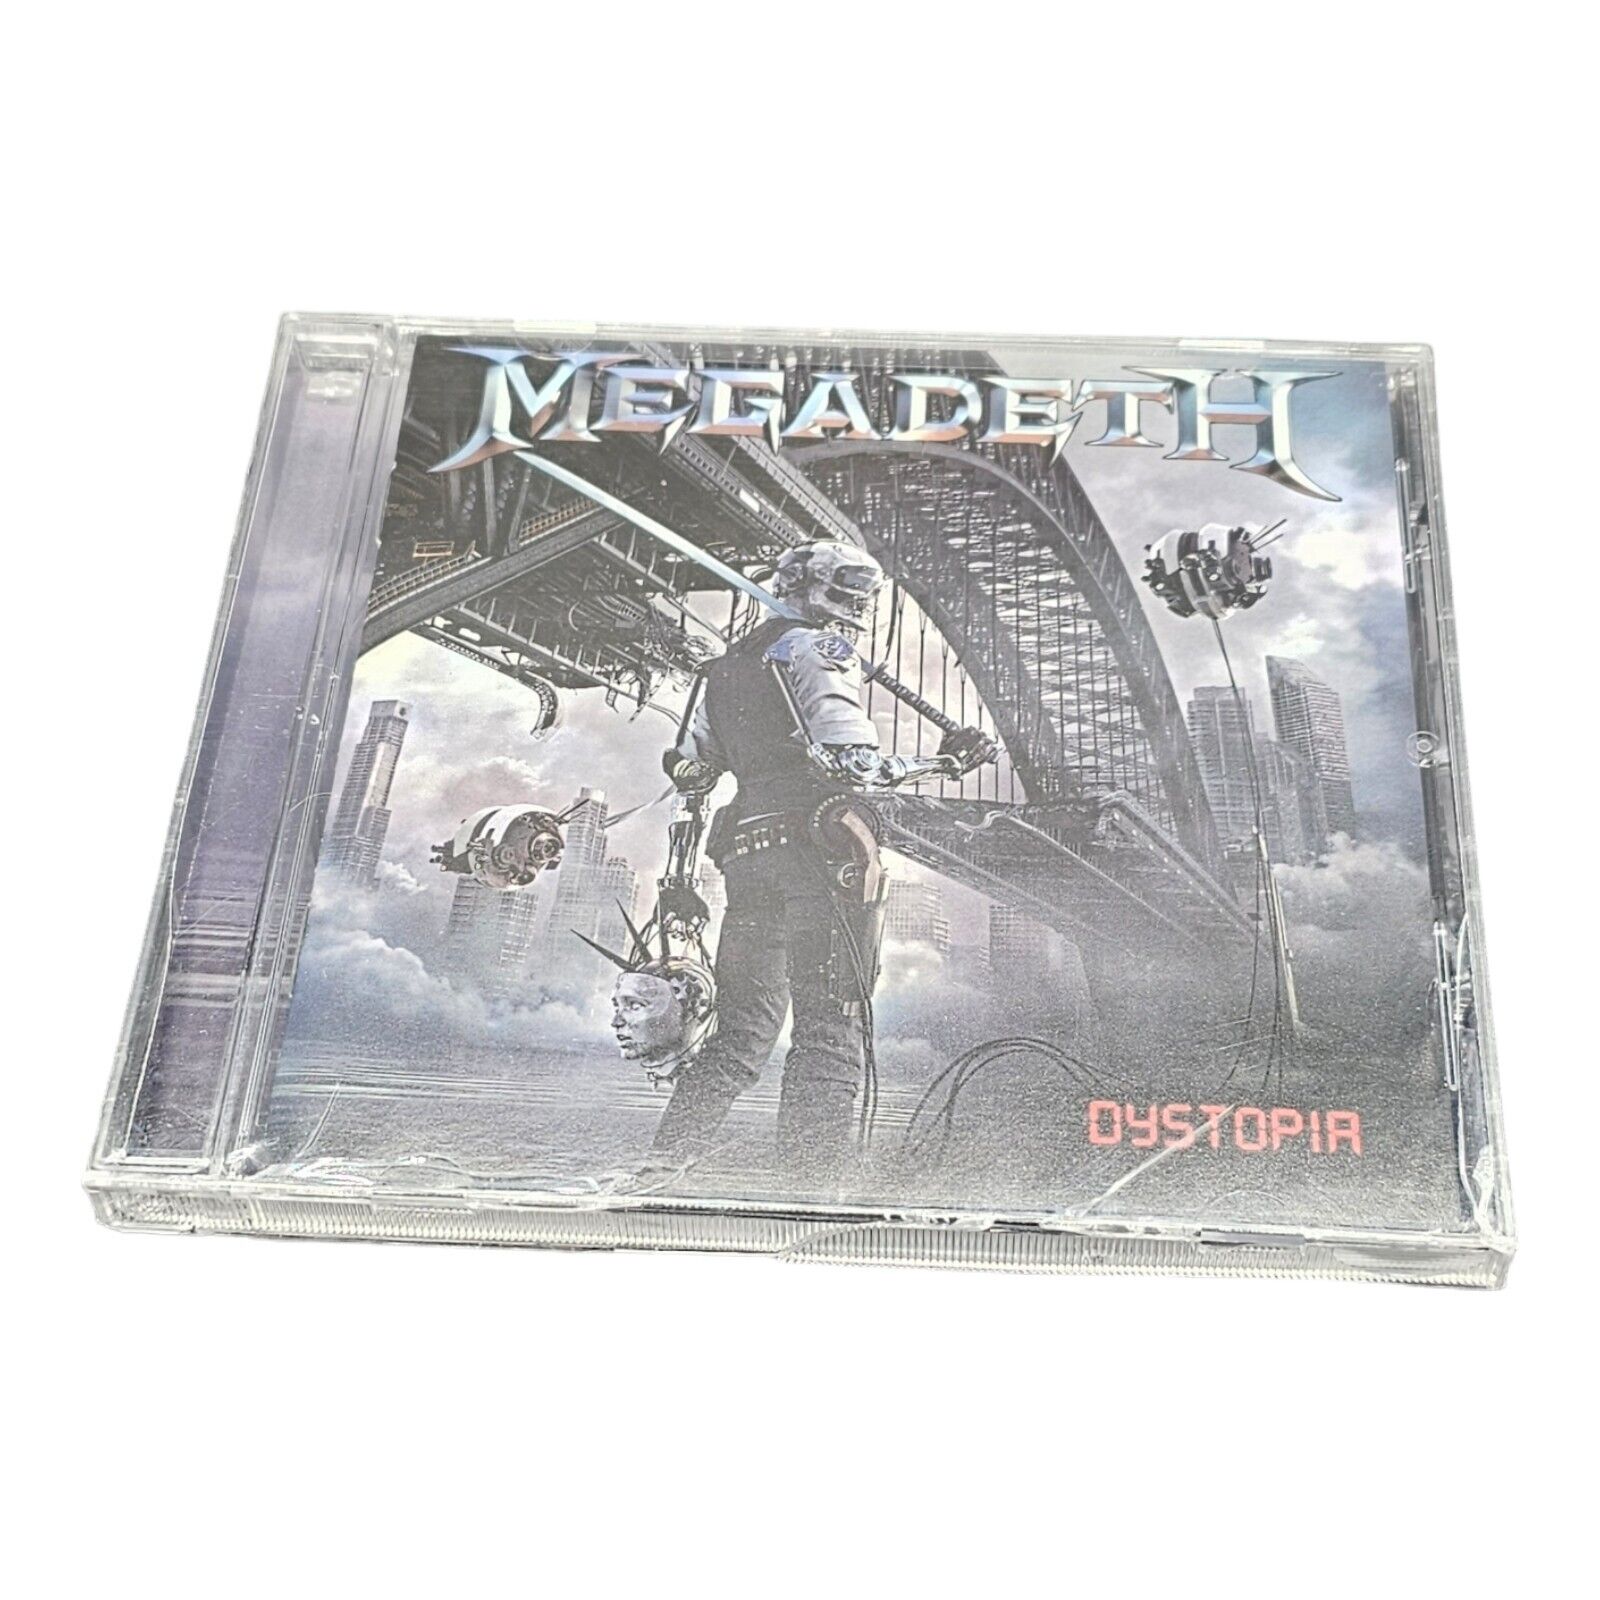 MEGADETH - DYSTOPIA NEW CD CRACKED CASE